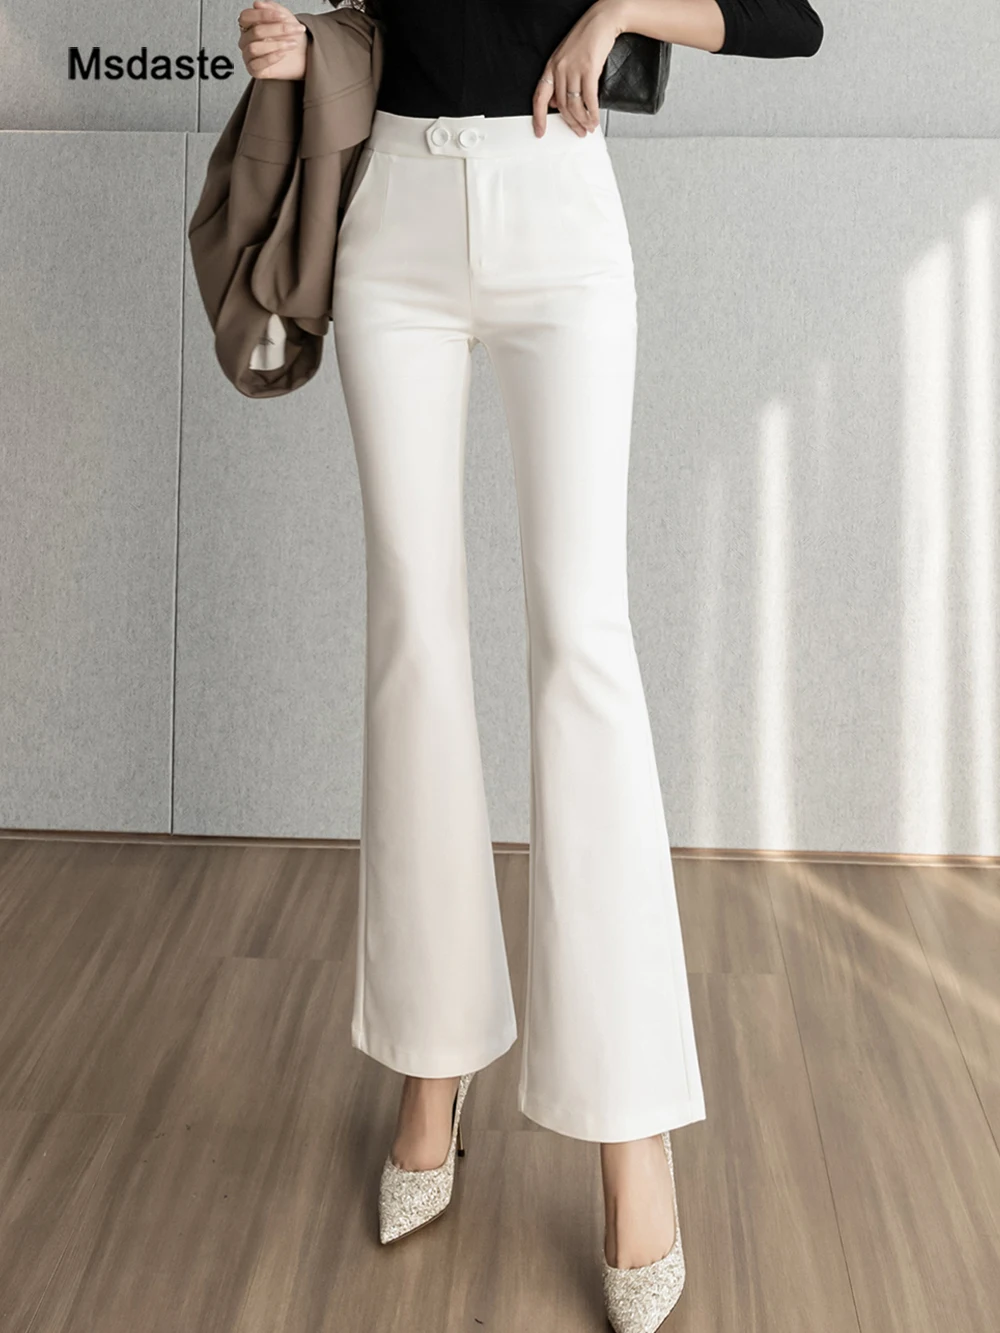 

Pants for Women High Waist Slightly Stretchy Lady Trousers Pantalone Mujer Workwear Bodycon Korean Casual Woman Flare Pants